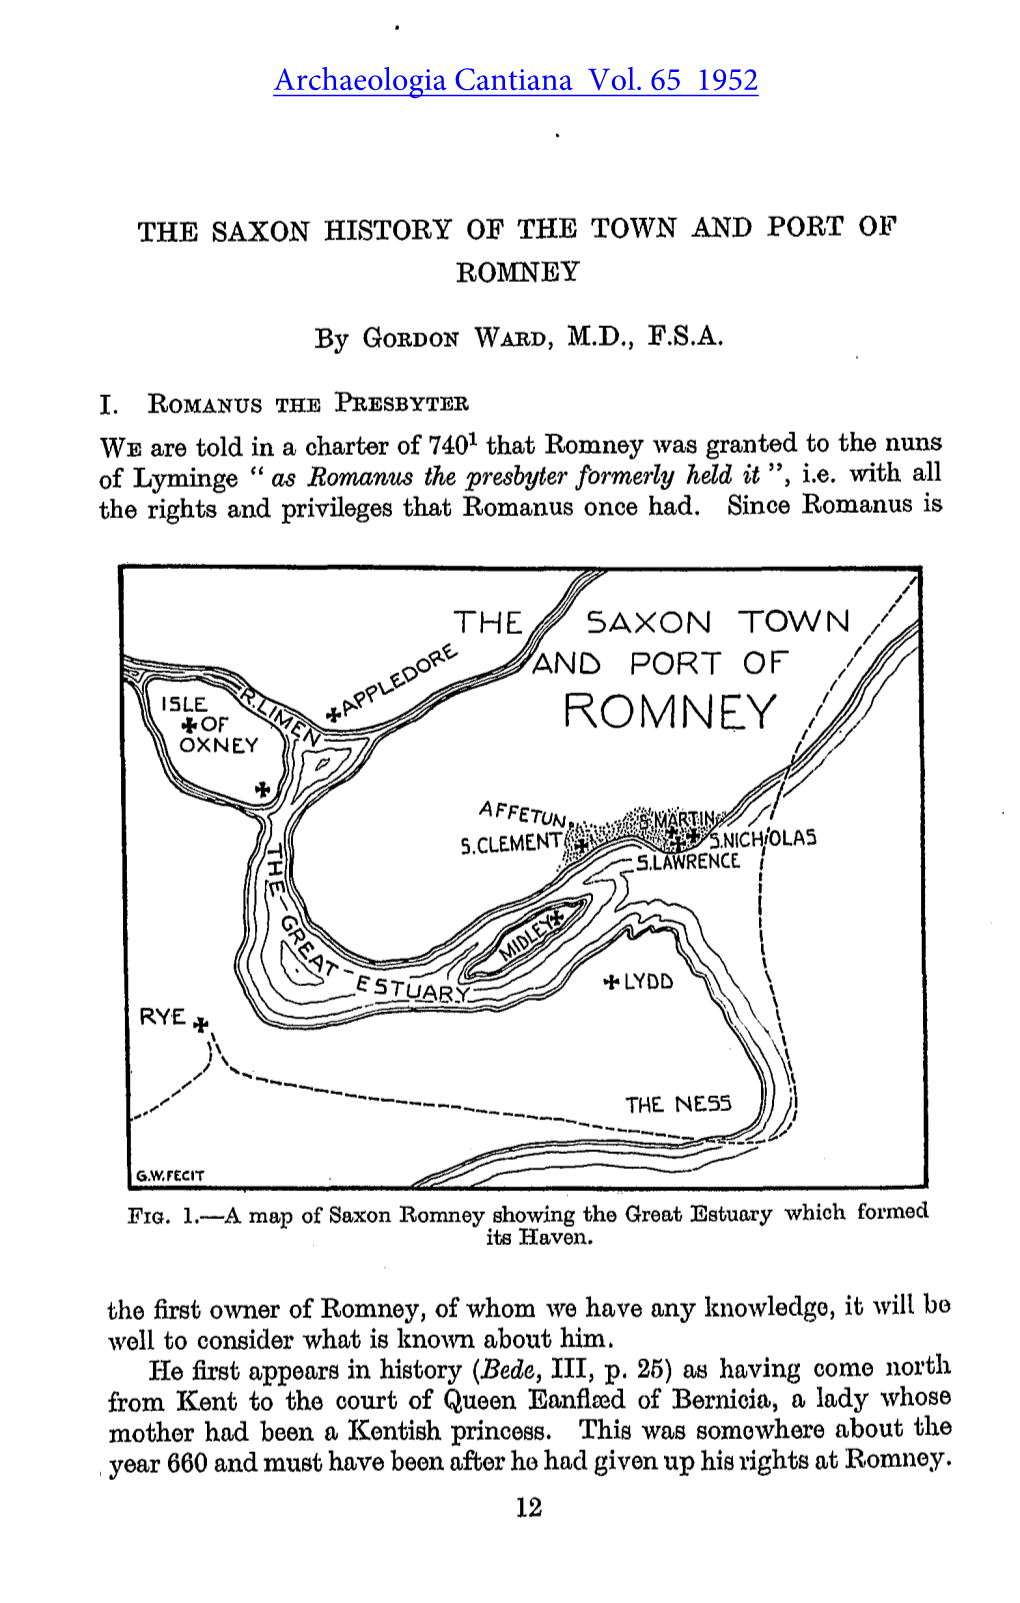 The Saxon History of the Town and Port of Romney